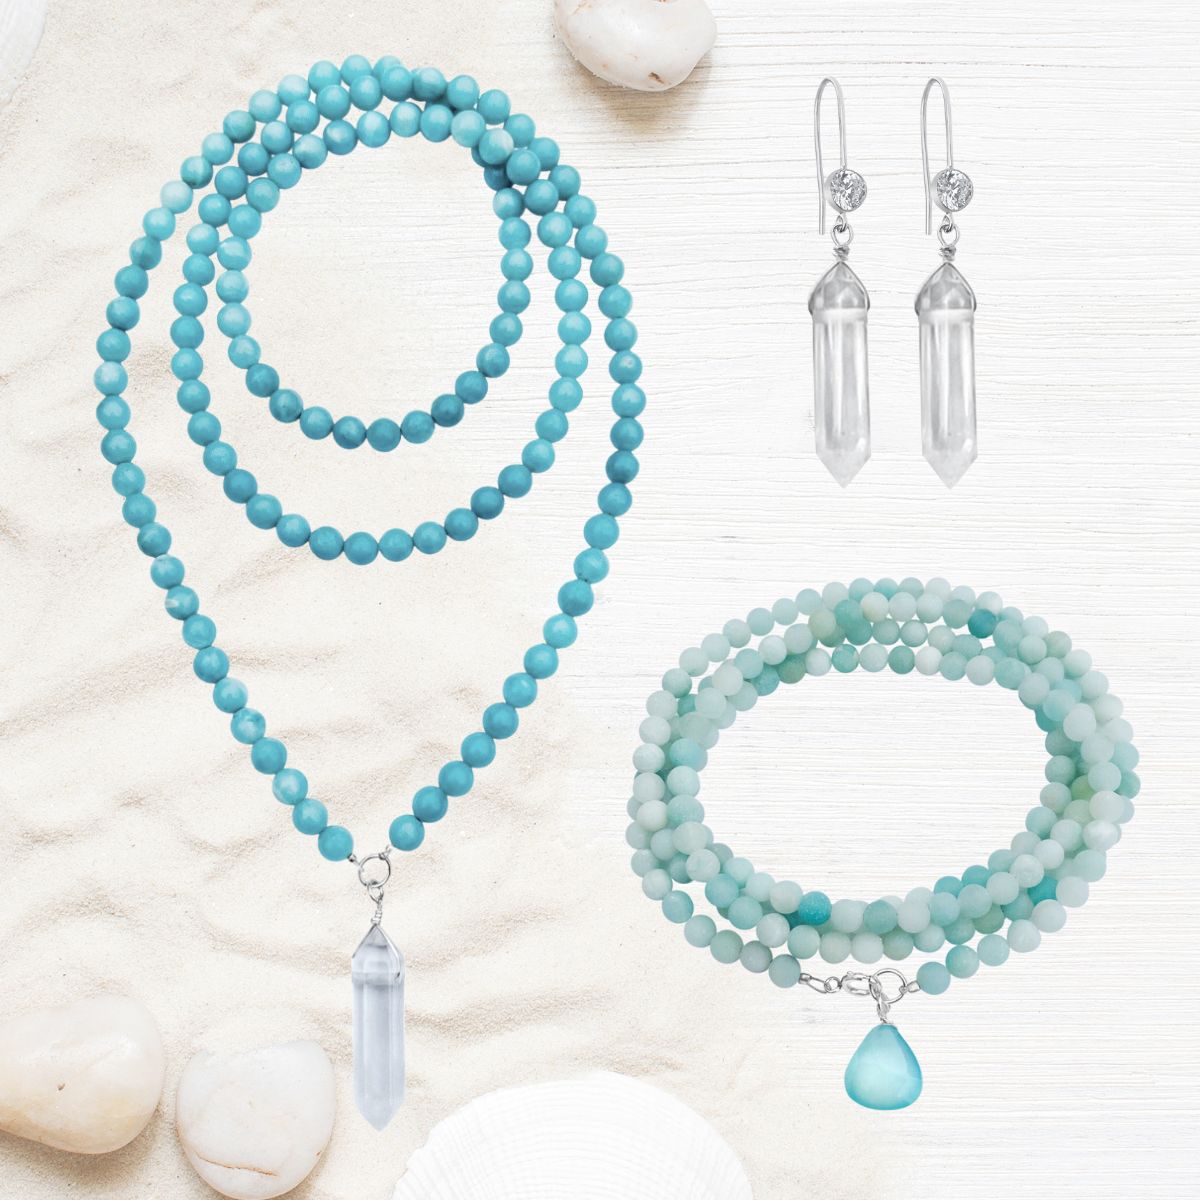 Wearing the Intuition Infusion Amazonite and Crystal Jewelry Set is a beautiful way to show your commitment to your spiritual journey, while also making a fashion statement. 